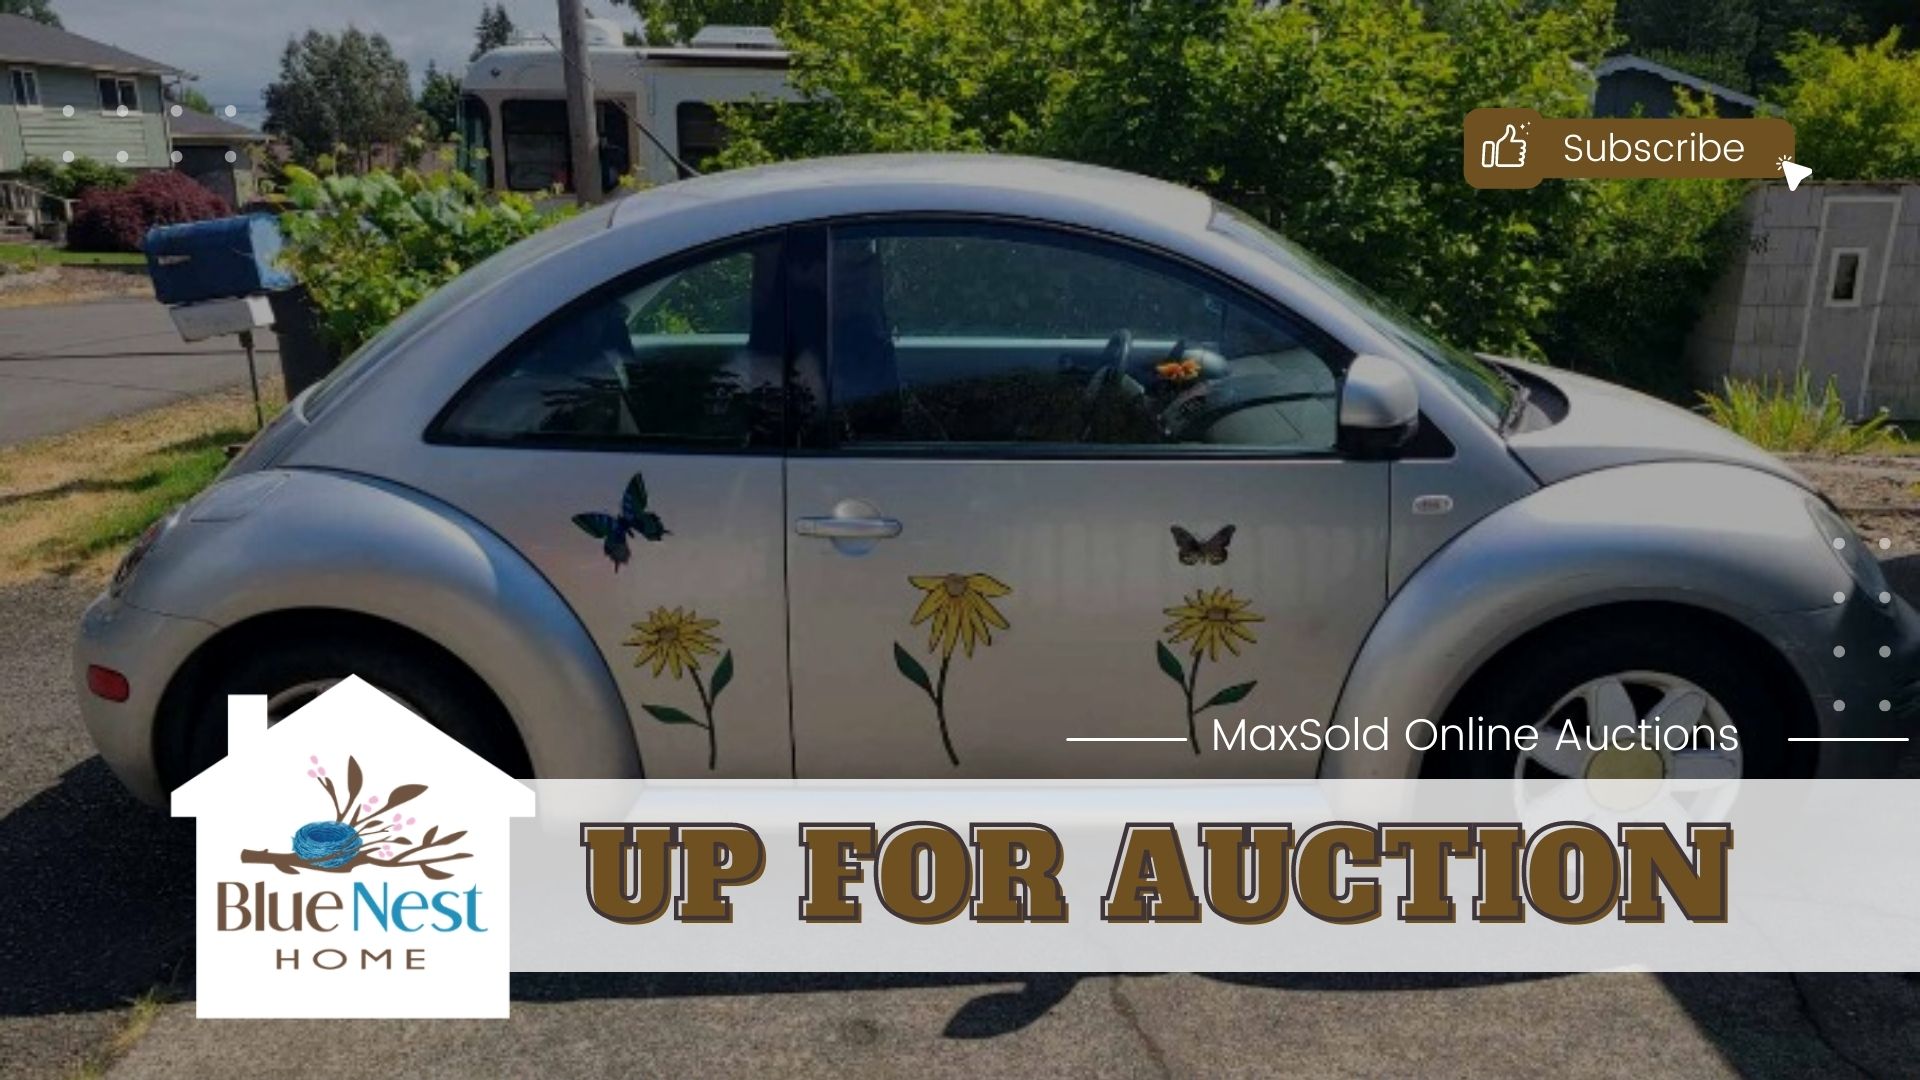 Youtube preview of a vehicle for sale at online estate sale auction a 2000 Volkswagen beetle in Shelton Washington with Blue Nest Home.